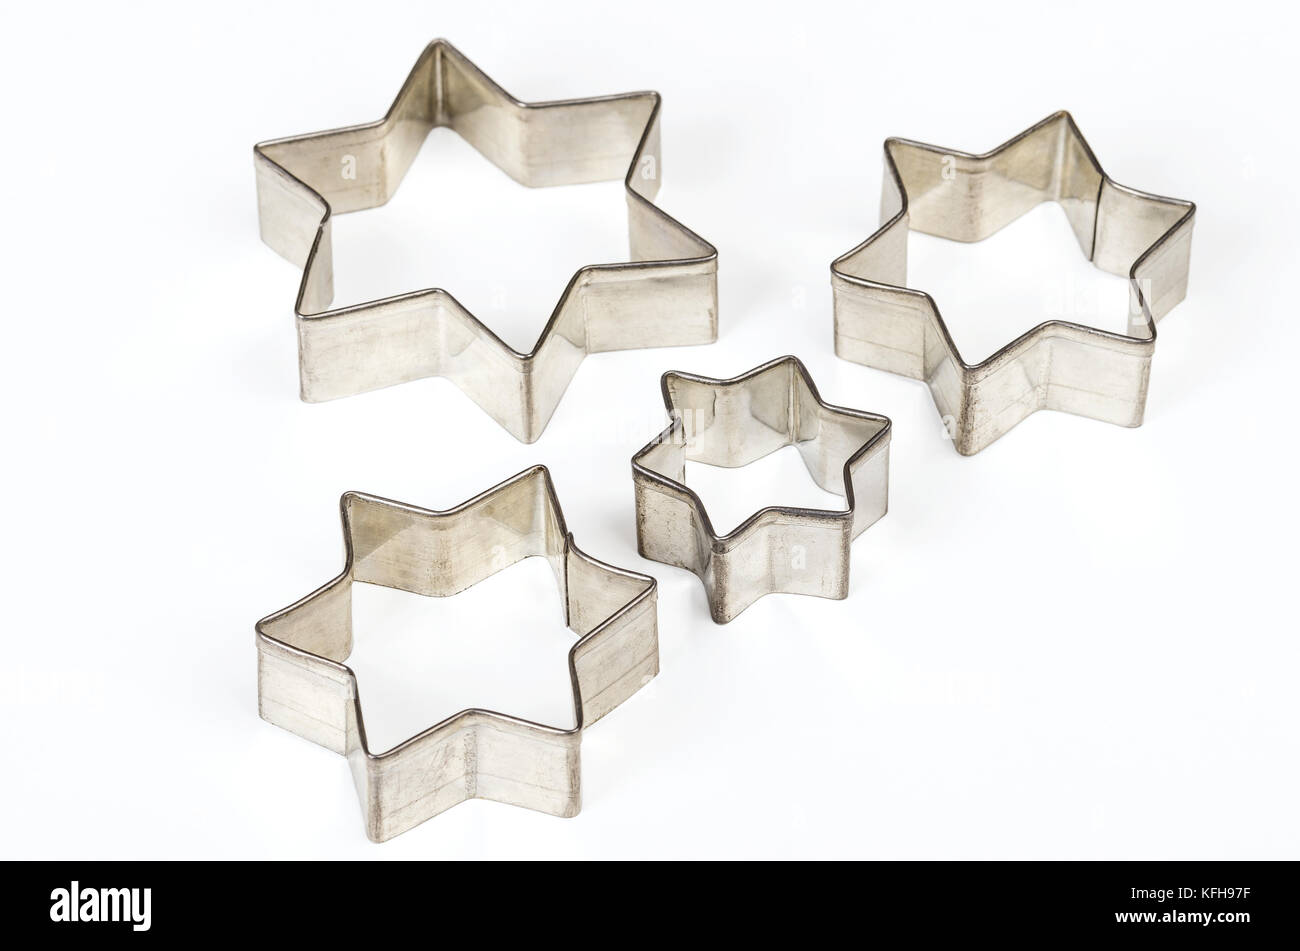 Four star shaped Christmas cookie cutters over white. Tin biscuit cutters, tool to cut cookie dough in particular shapes and to make cutouts. Stock Photo